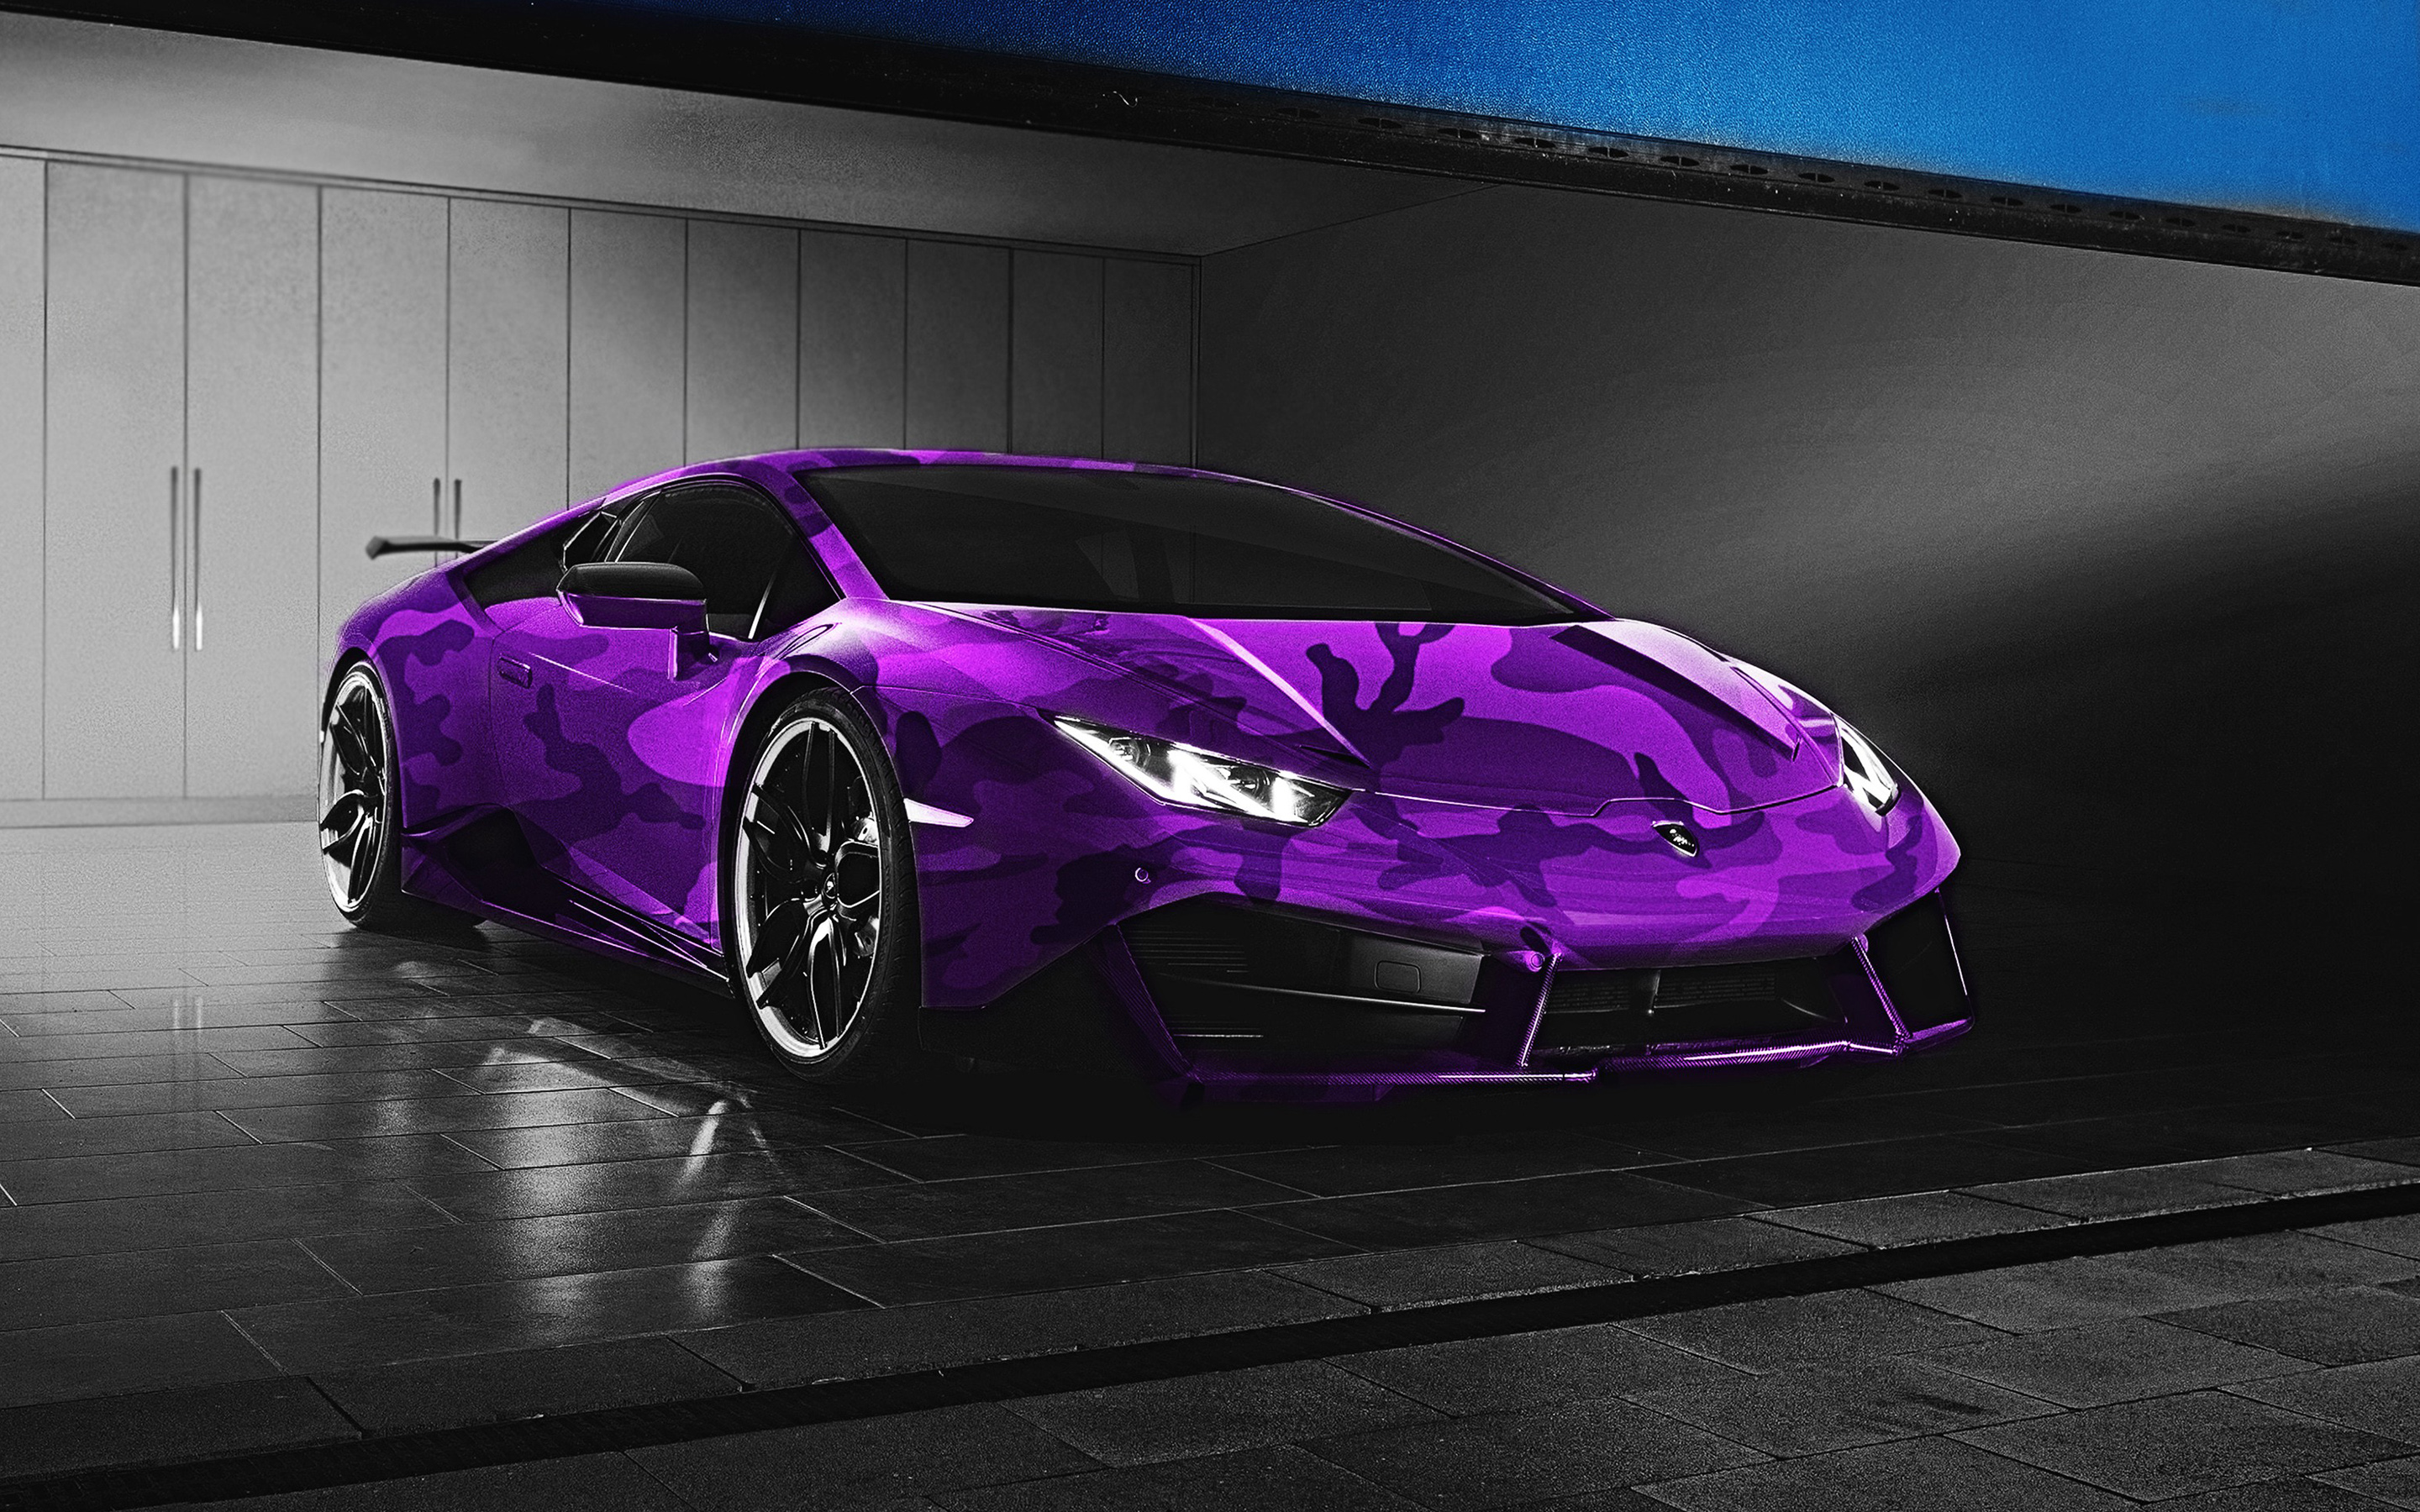 Download wallpapers Purple Lamborghini Aventador SV, 2019, purple  camouflage, front view, Aventador, purple supercar, italian sports cars,  Lamborghini for desktop with resolution 2880x1800. High Quality HD pictures  wallpapers